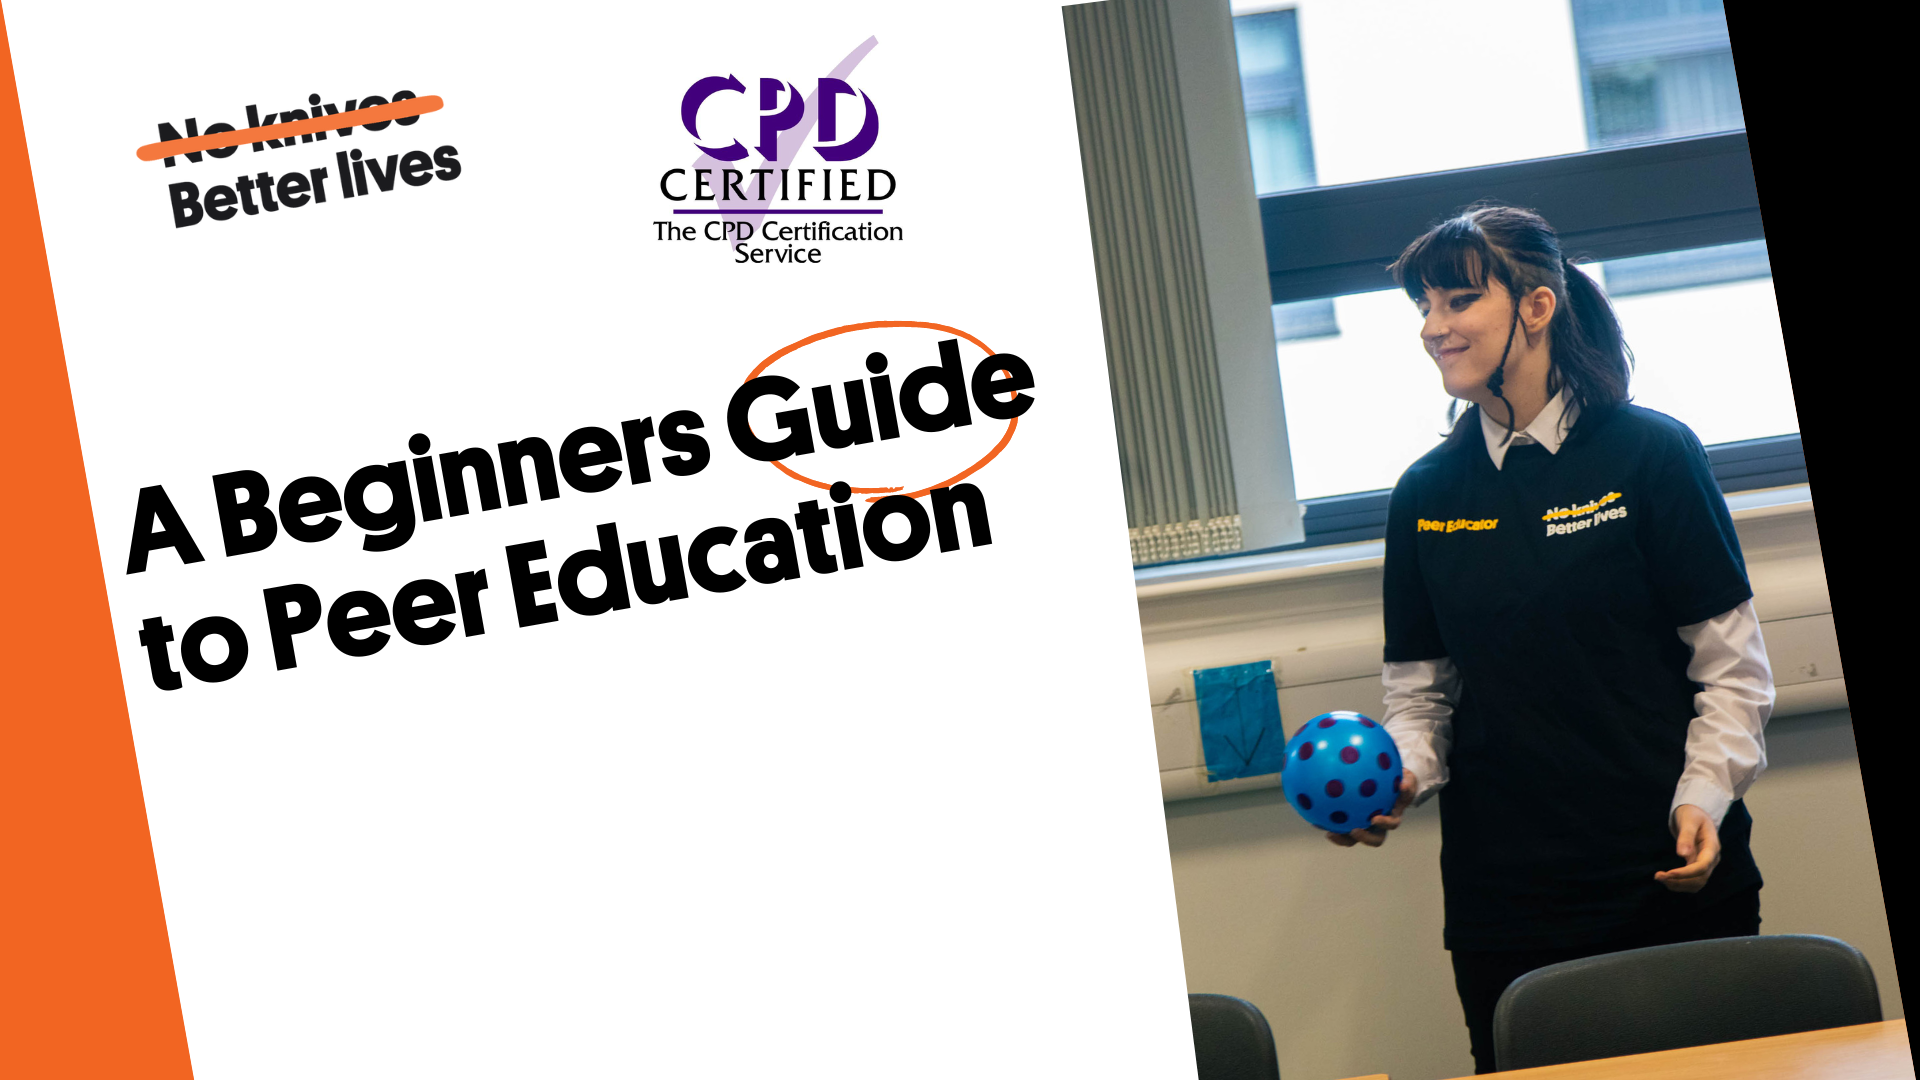 A Beginners Guide to Peer Education